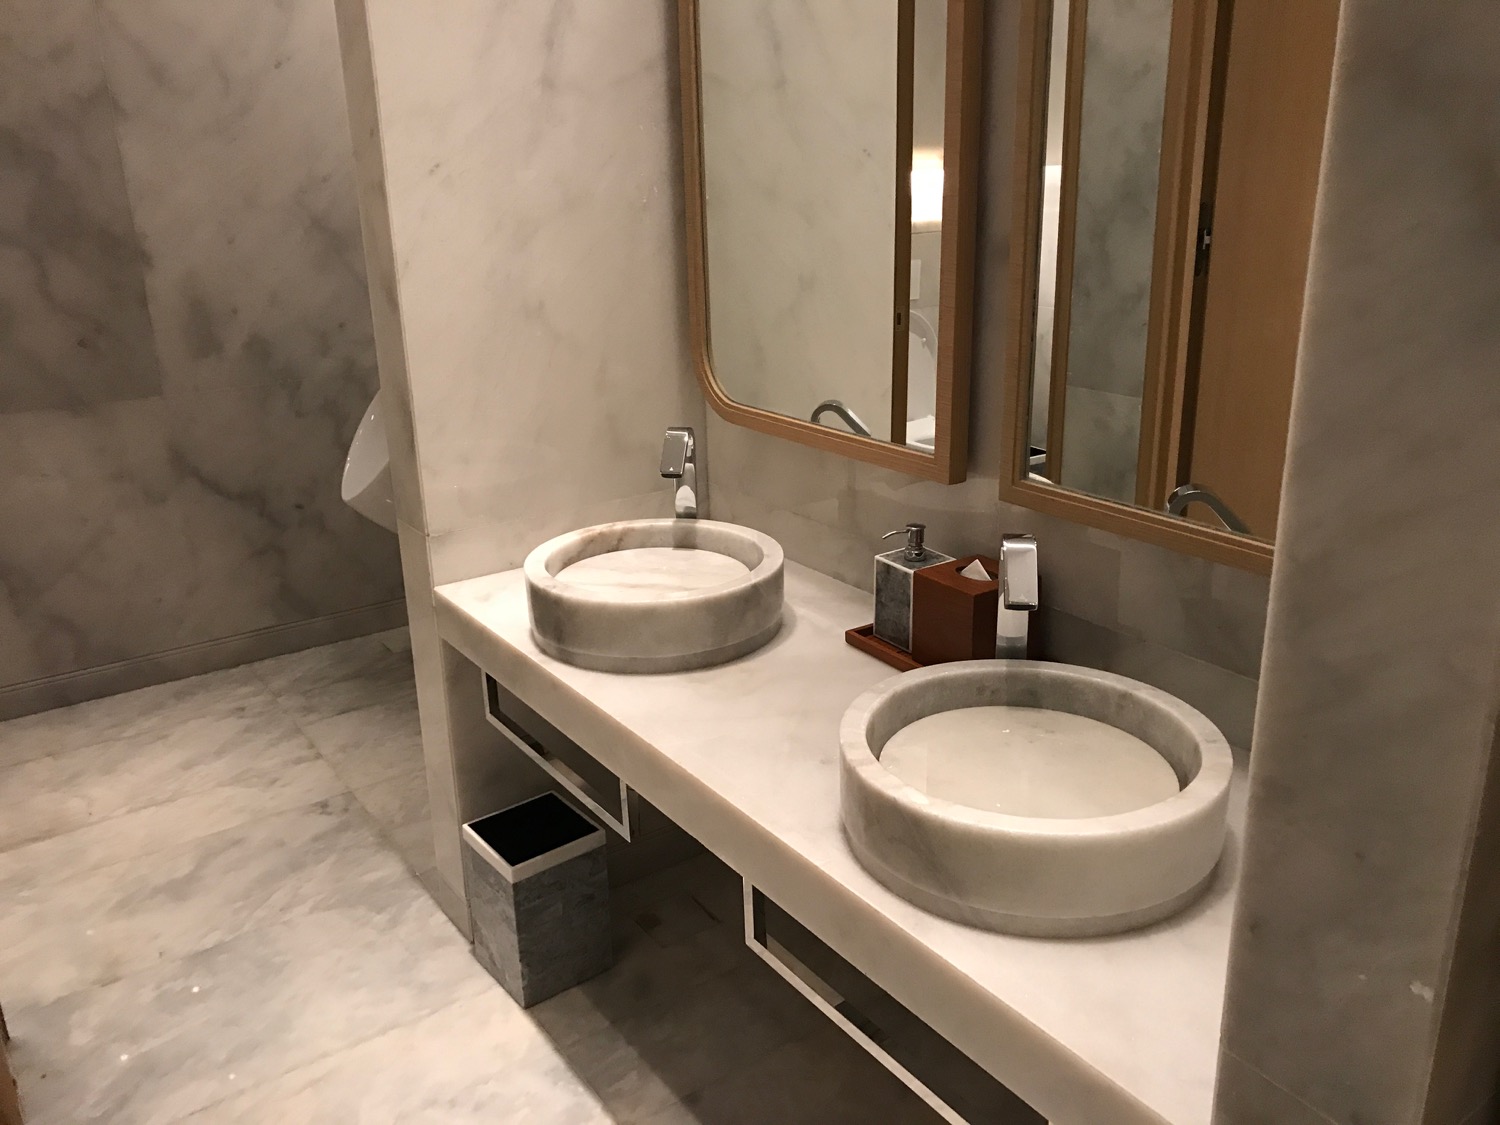 a bathroom with marble sinks and mirrors